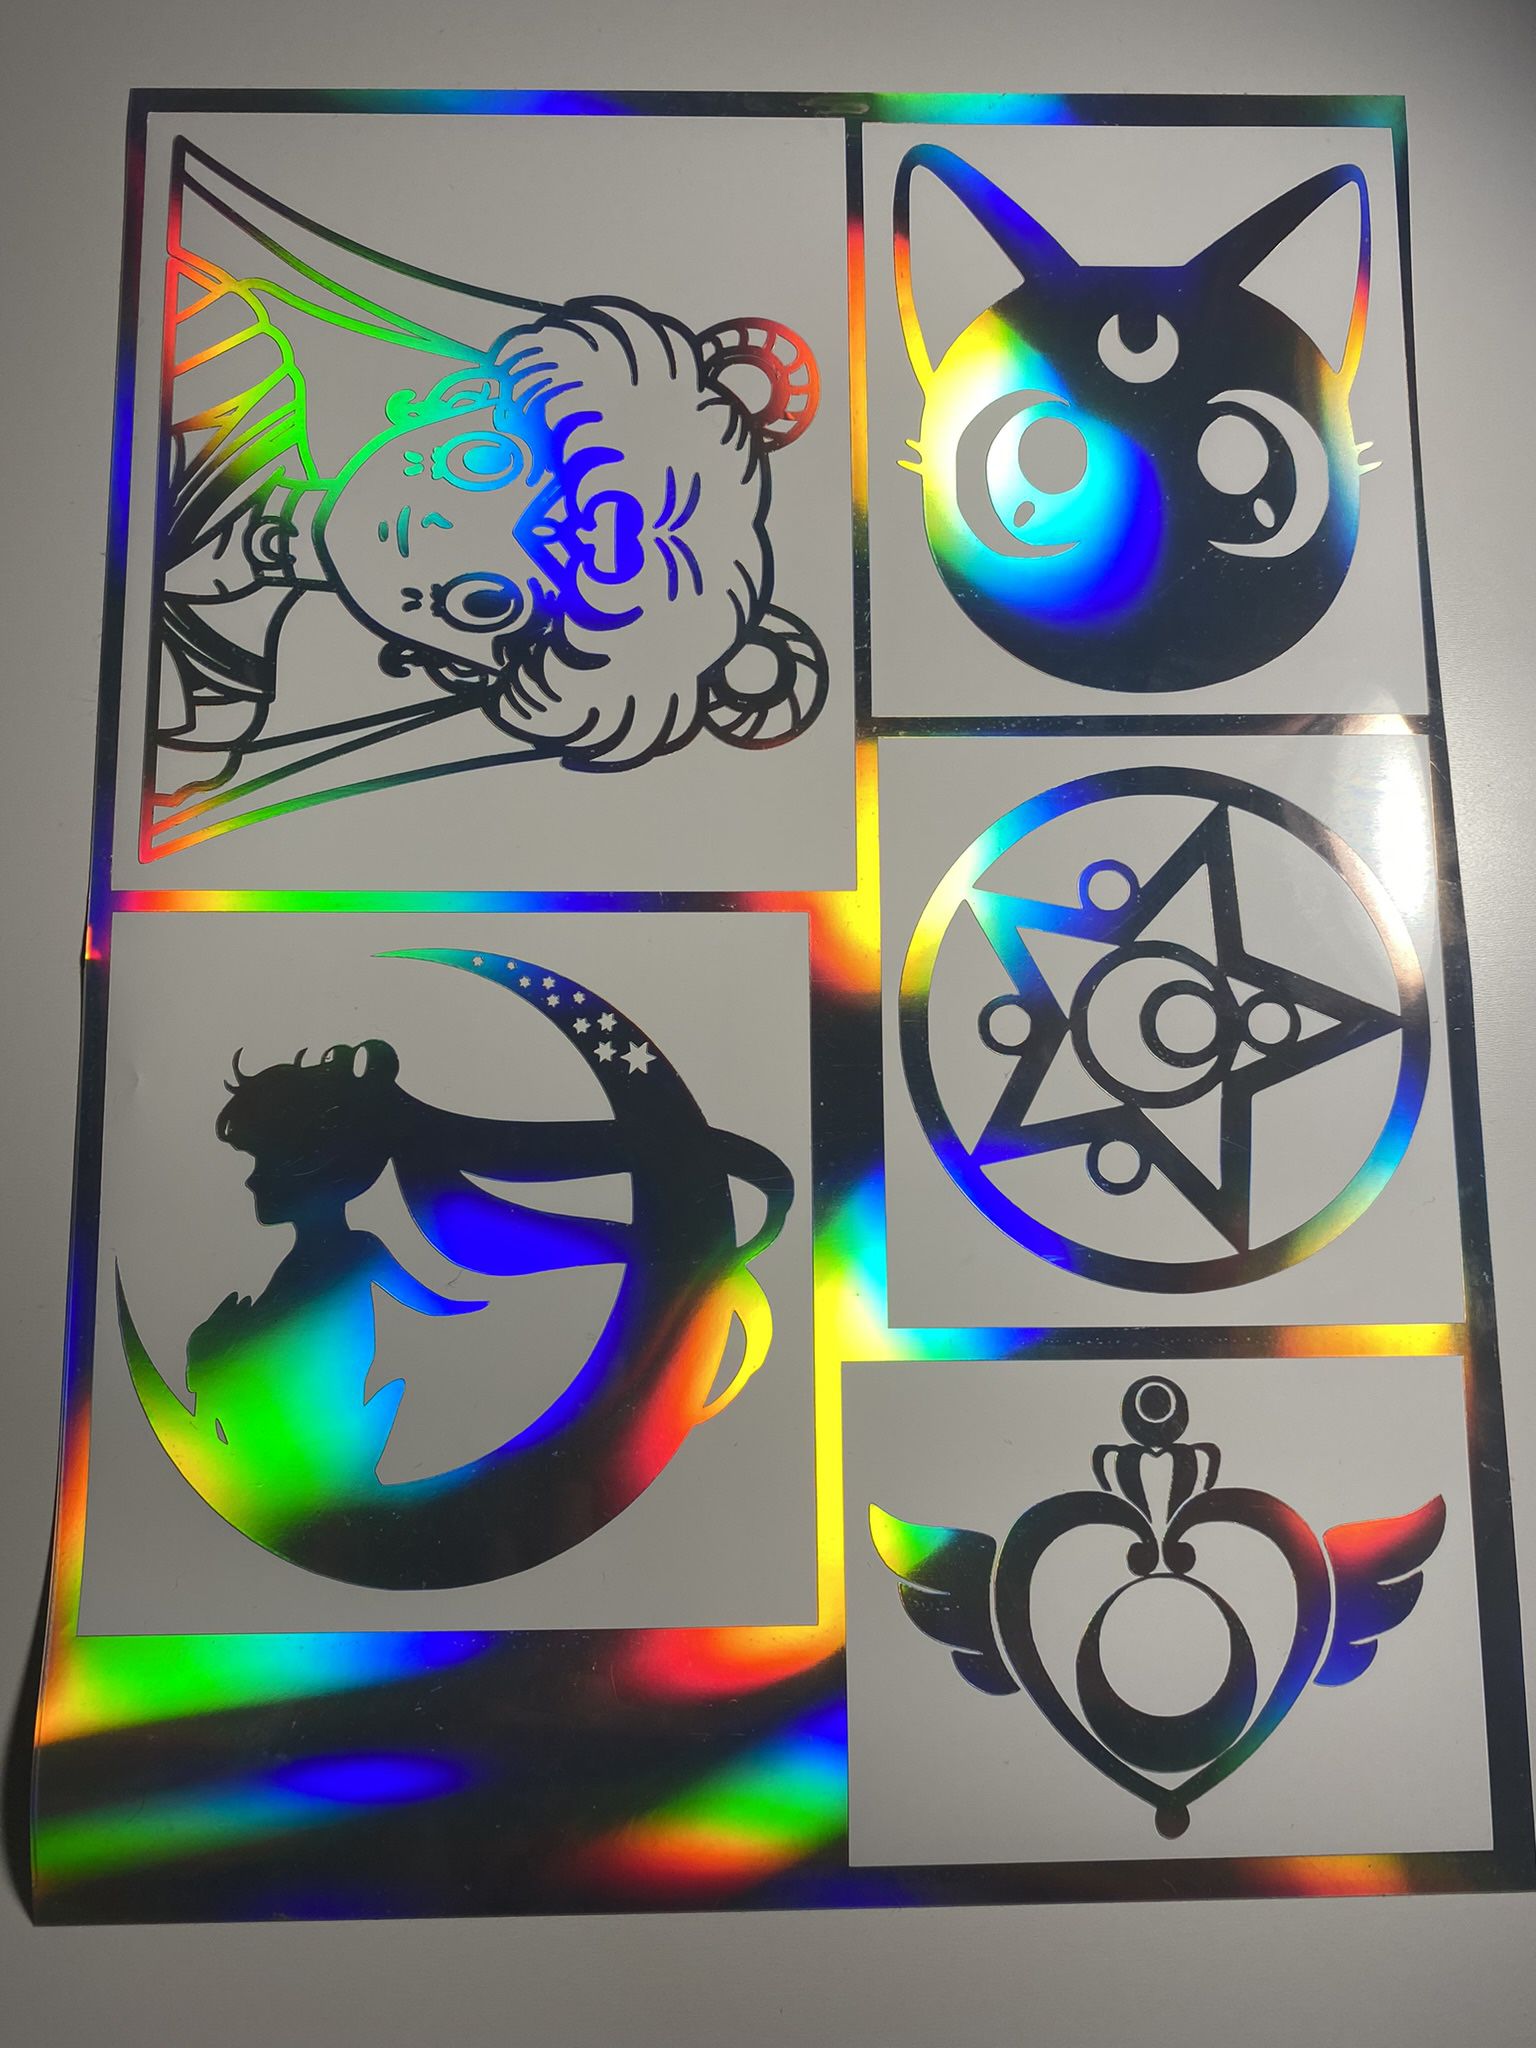 Sailor Moon Decal Stickers For Car Window Laptop Hydroflask Notebook Mirror 